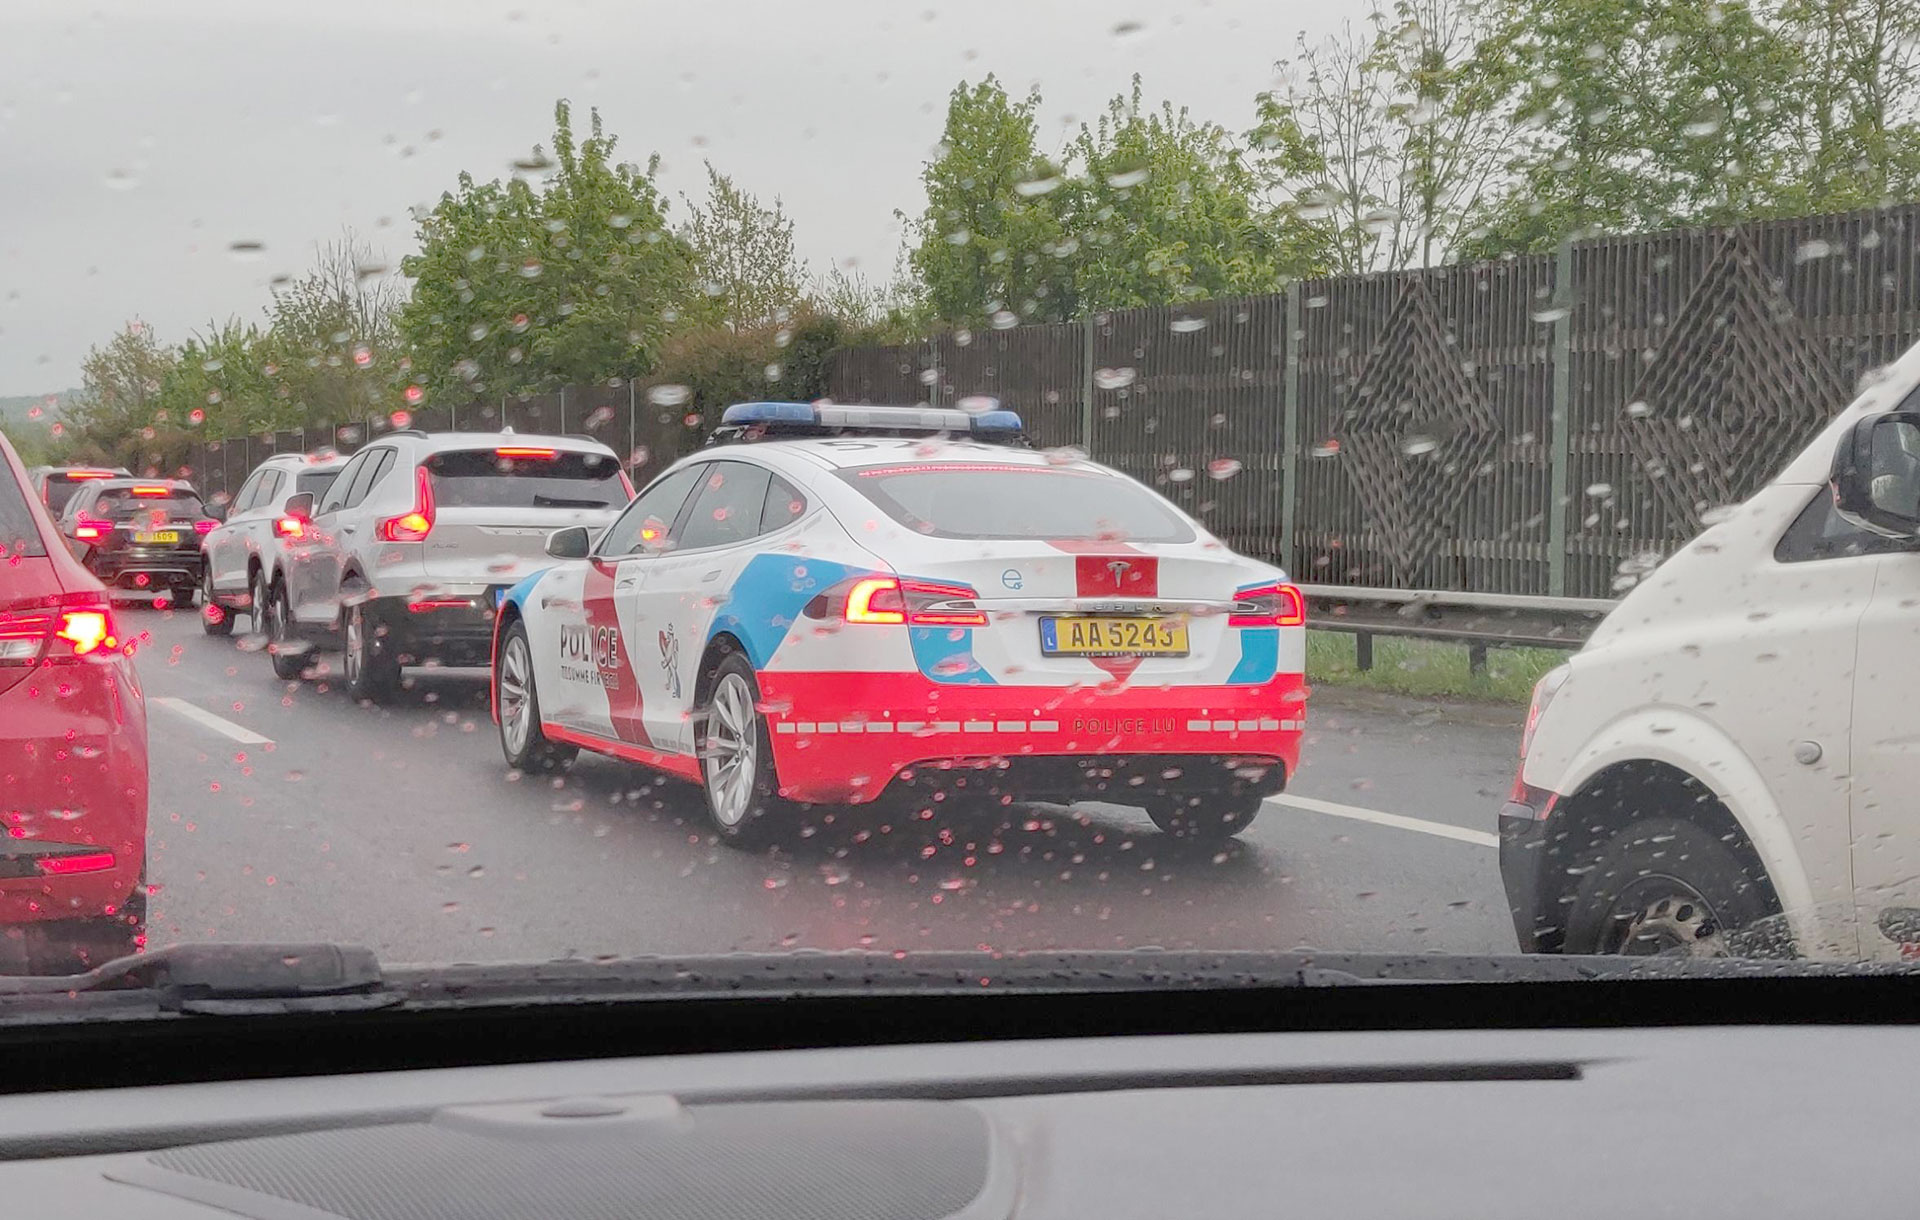 Luxembourg Police's Tesla Model S spotted in the rain and traffic jam. Photo Credits: u/EVmerch / Reddit